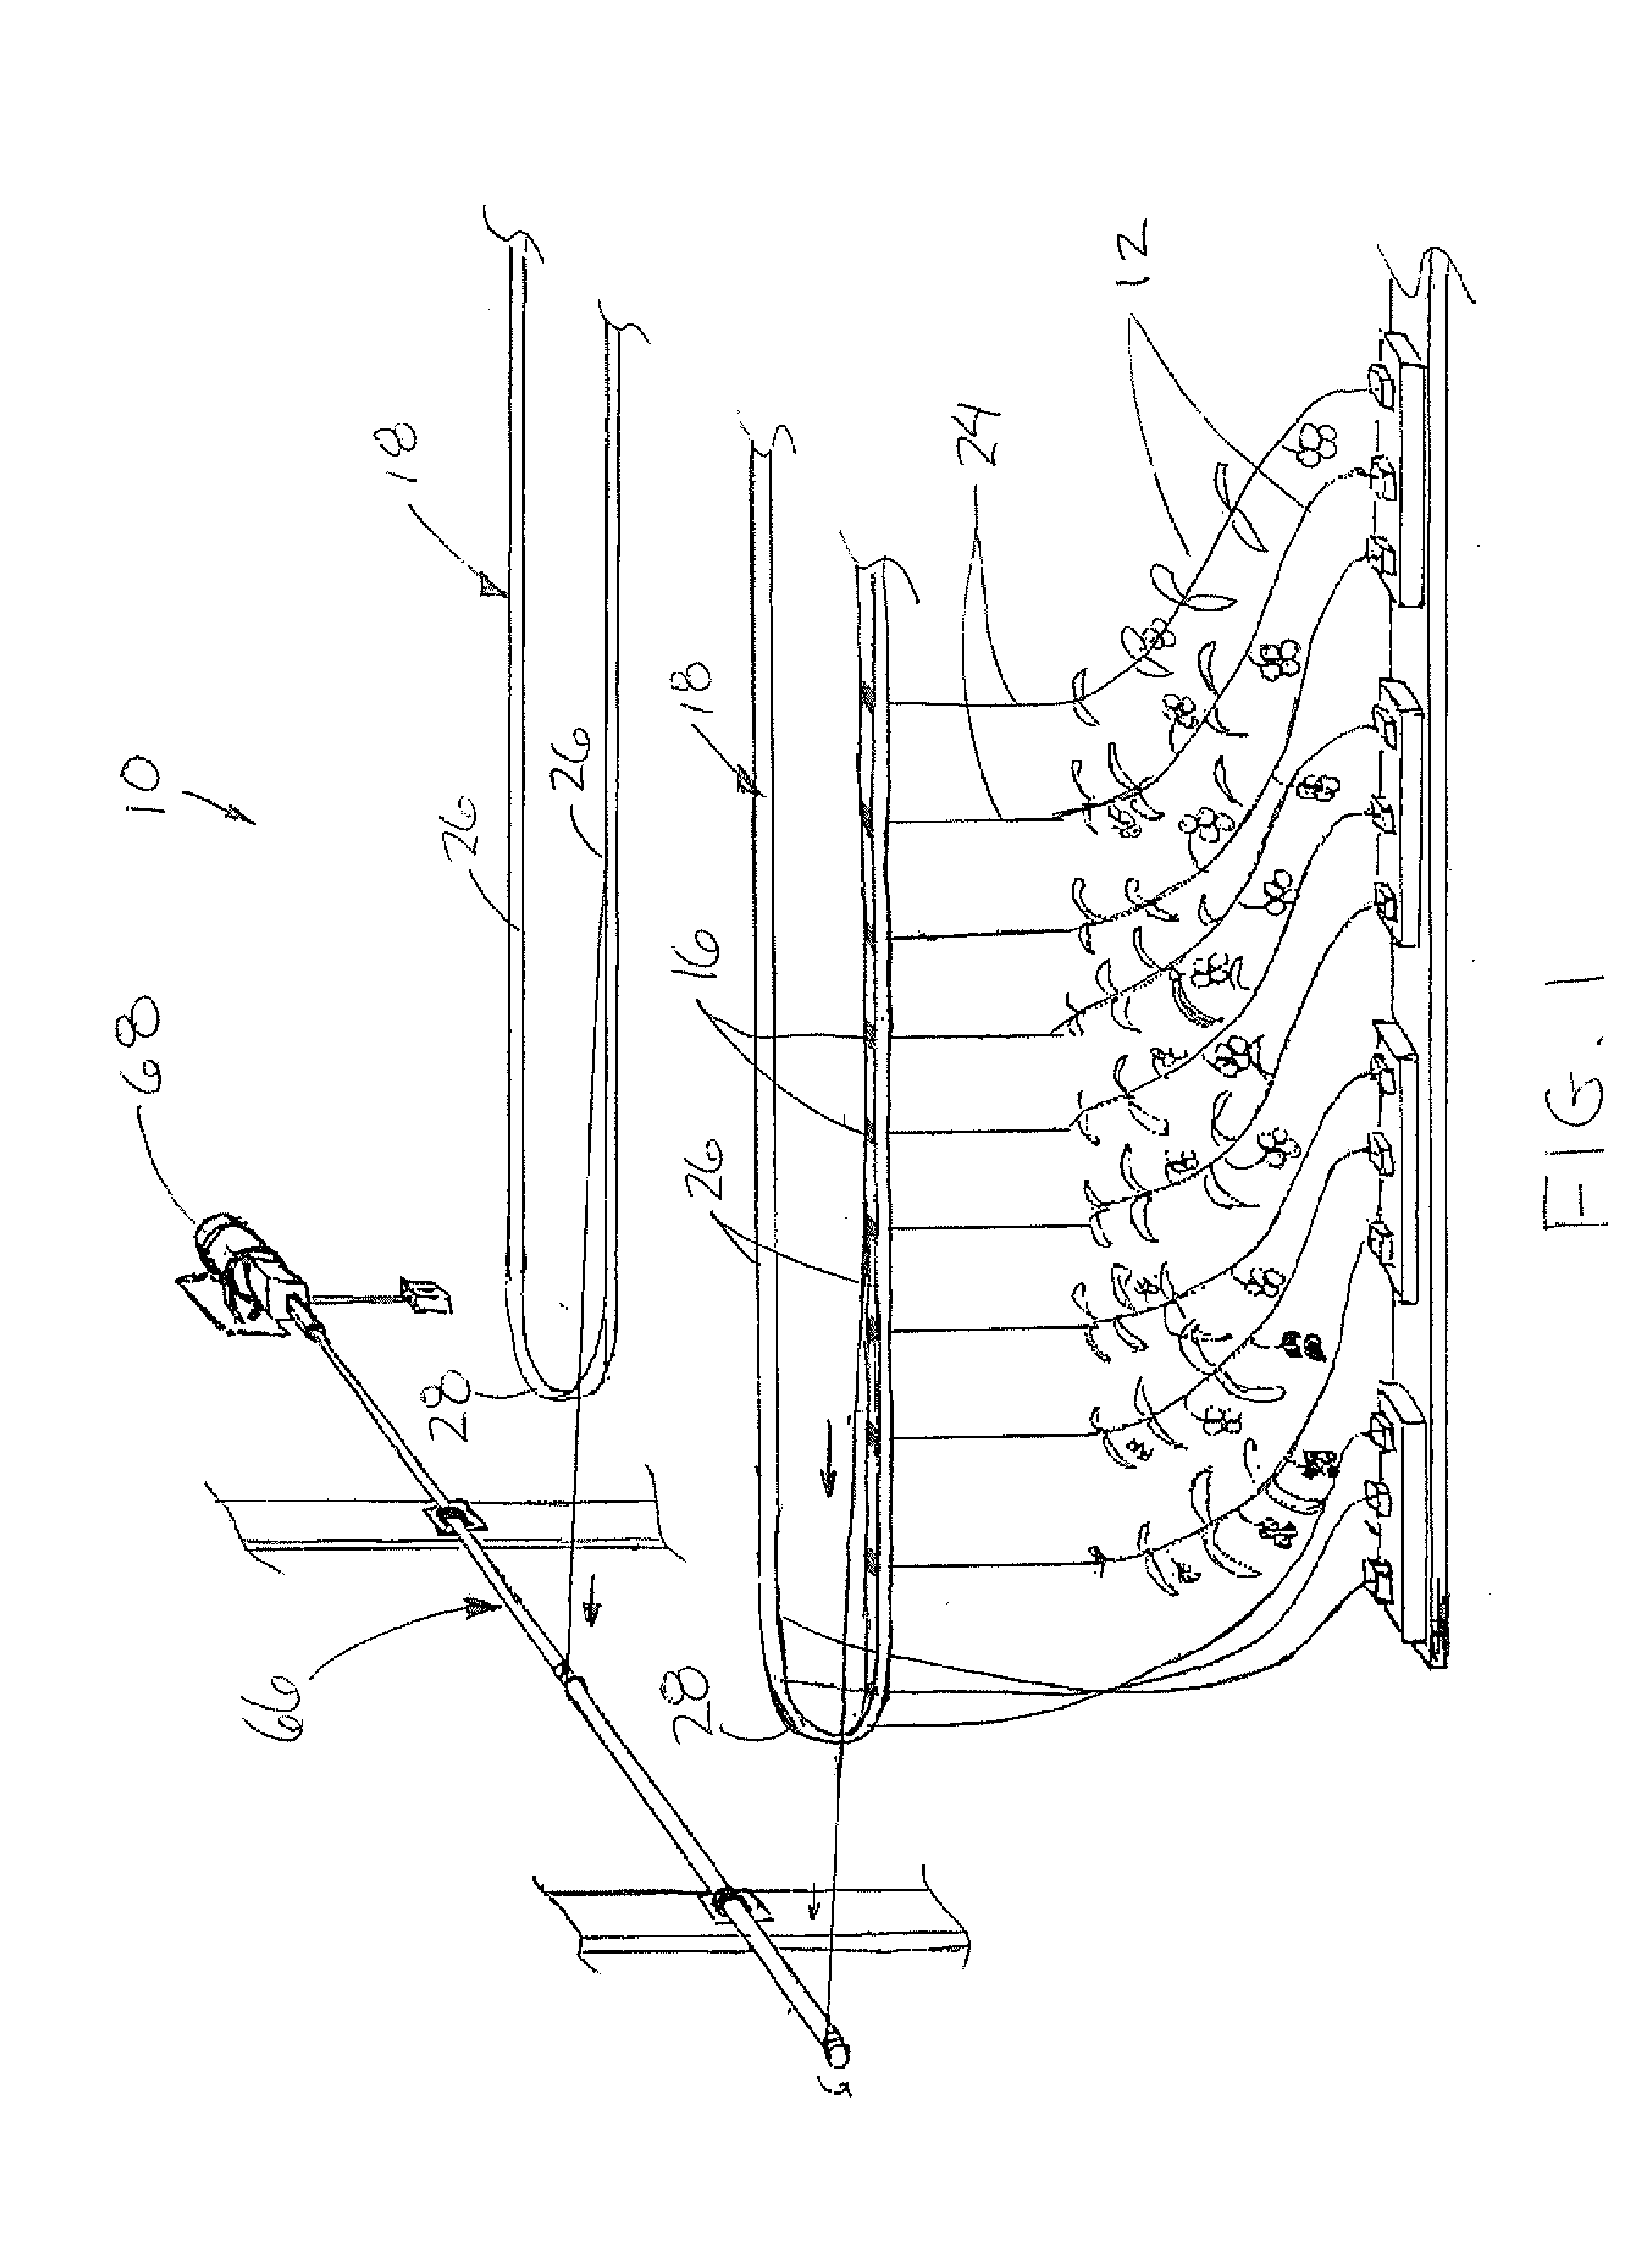 Vine Crop Supporting System